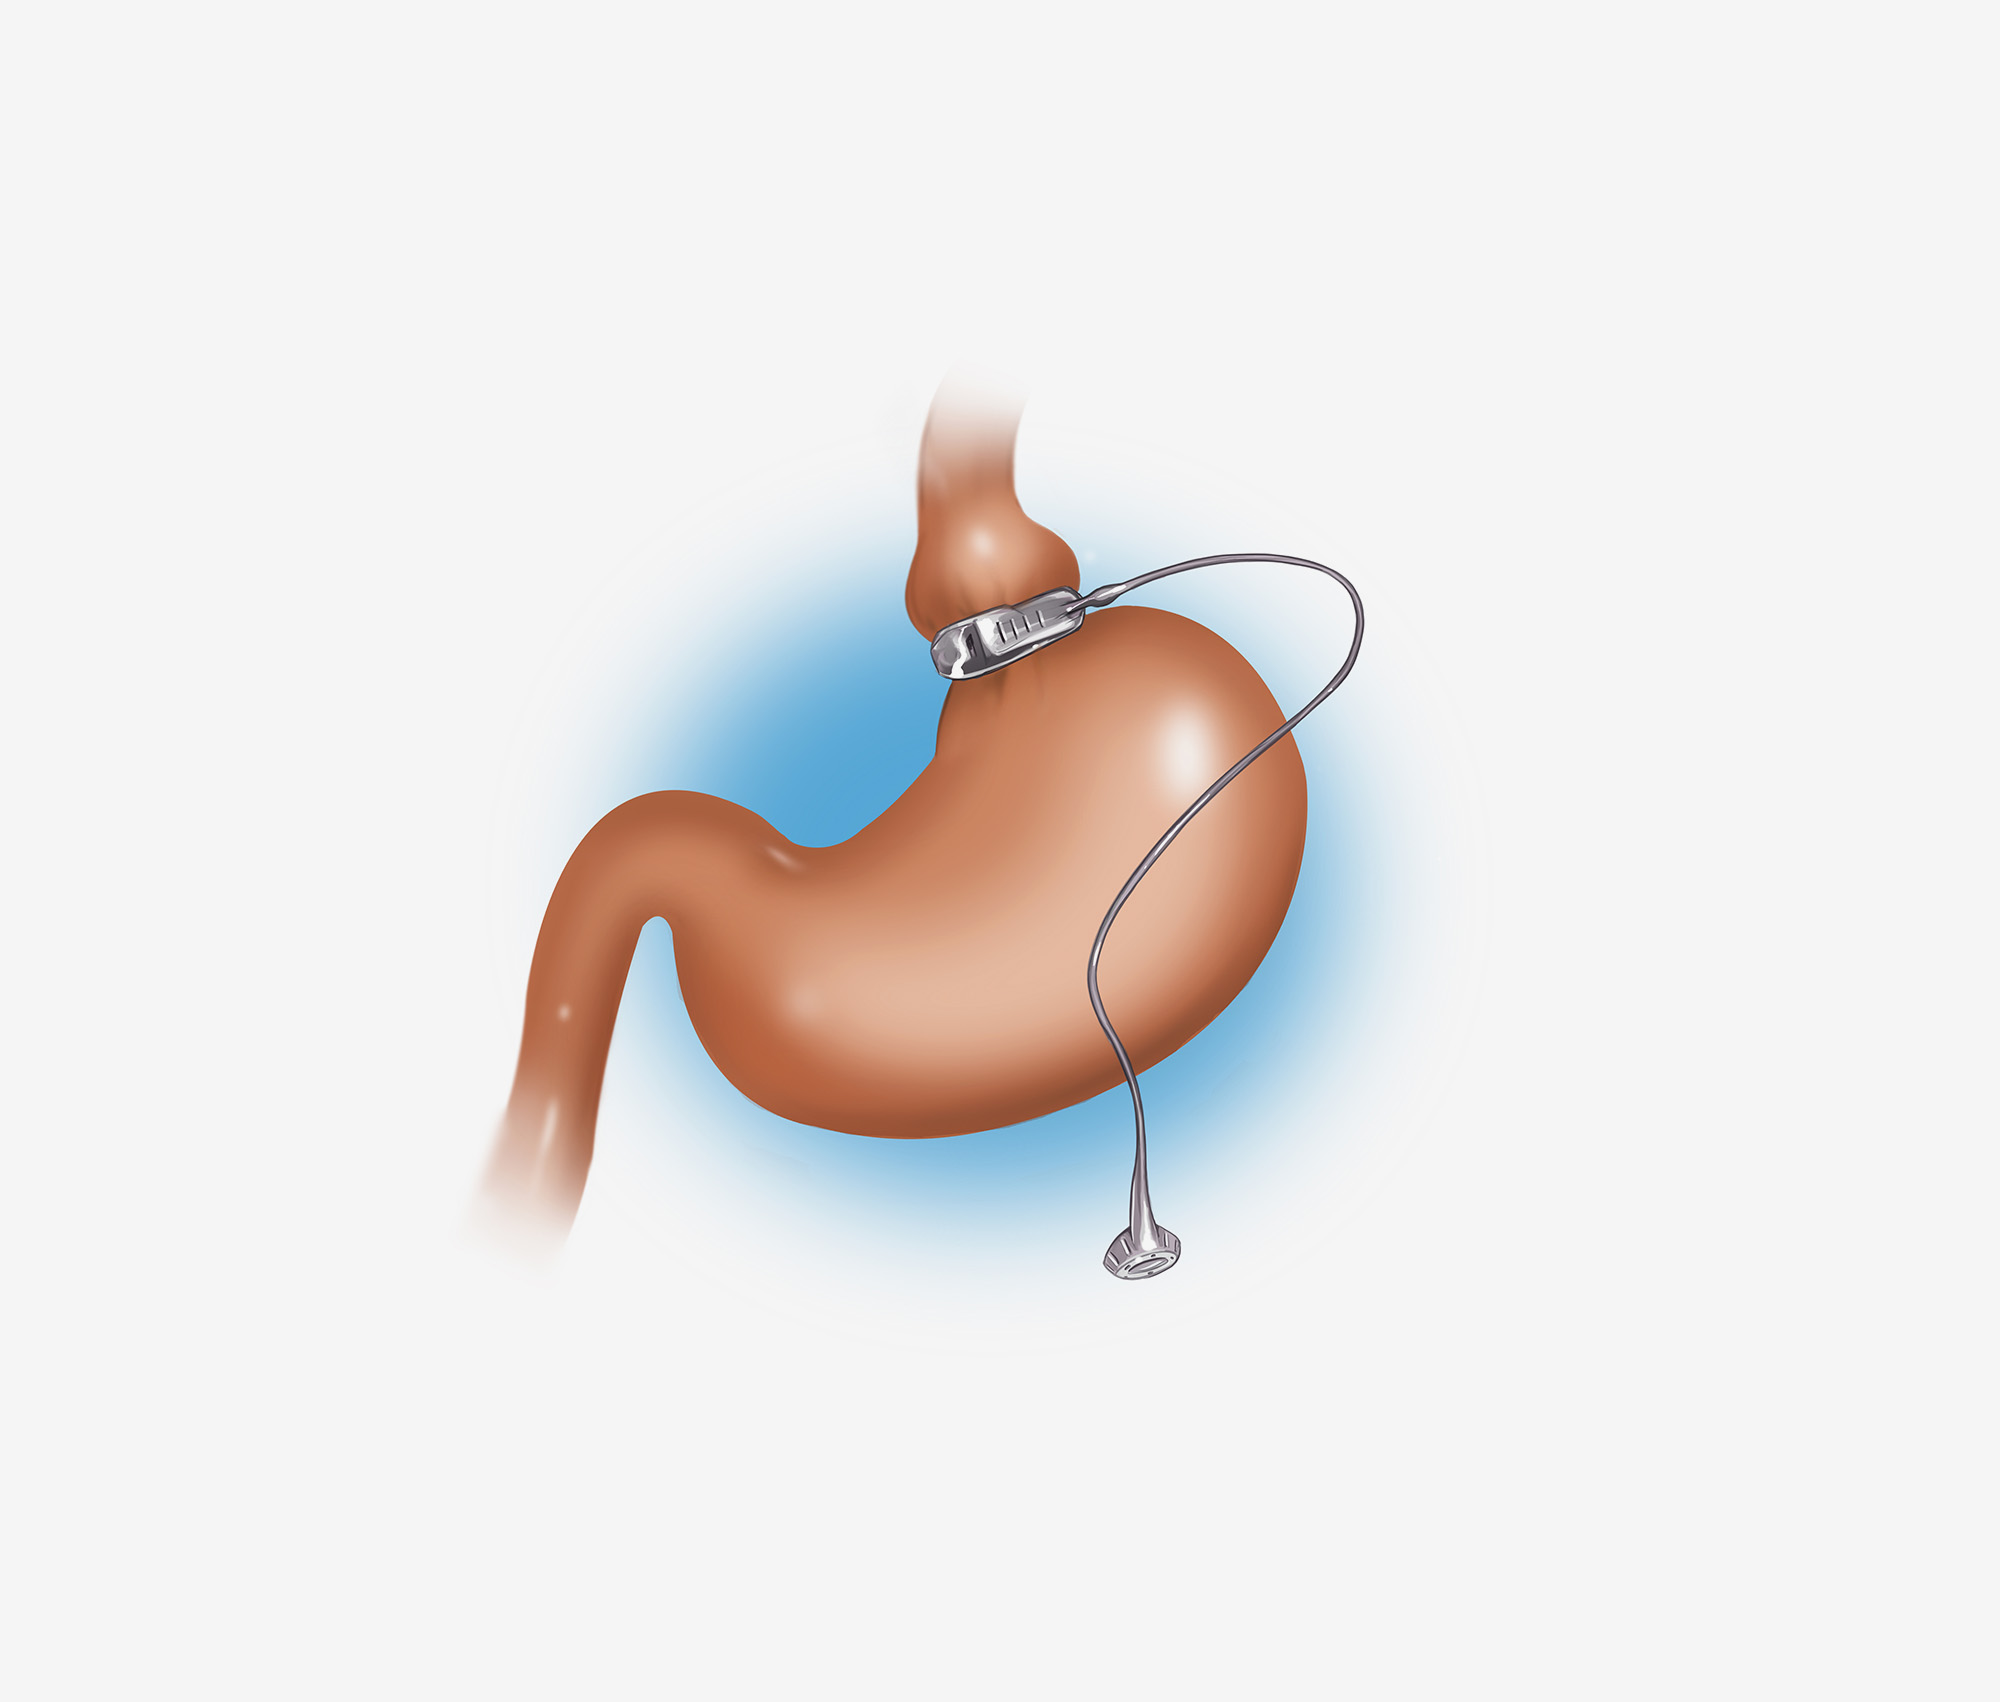 Illustration of a gastric band